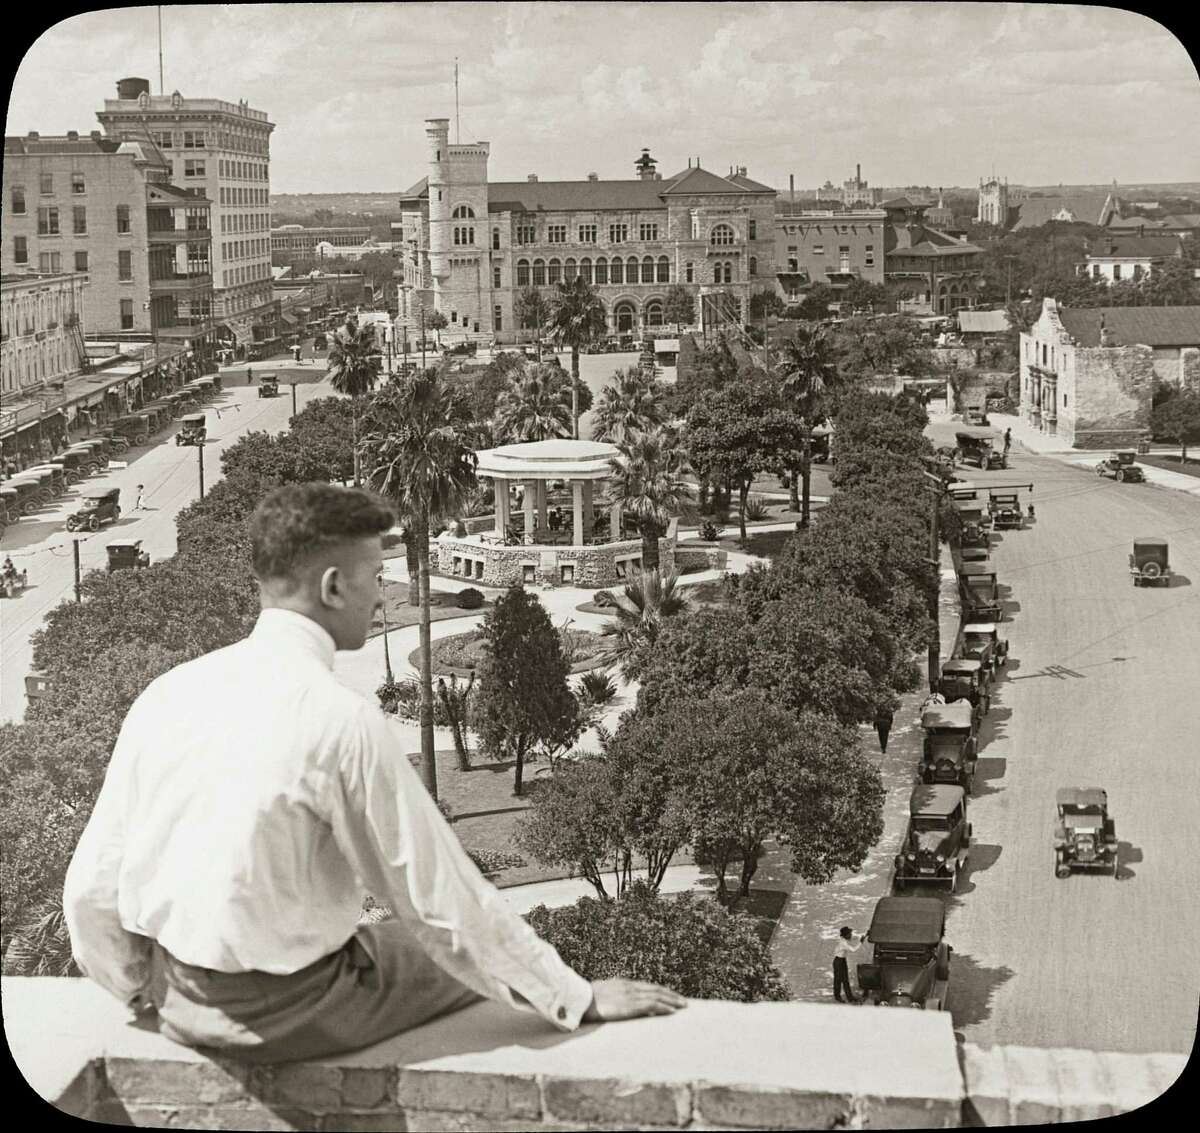 In this image from the 1920s, readers of "Downtown San Antonio" can look over the shoulder of this unknown man at Alamo Plaza.